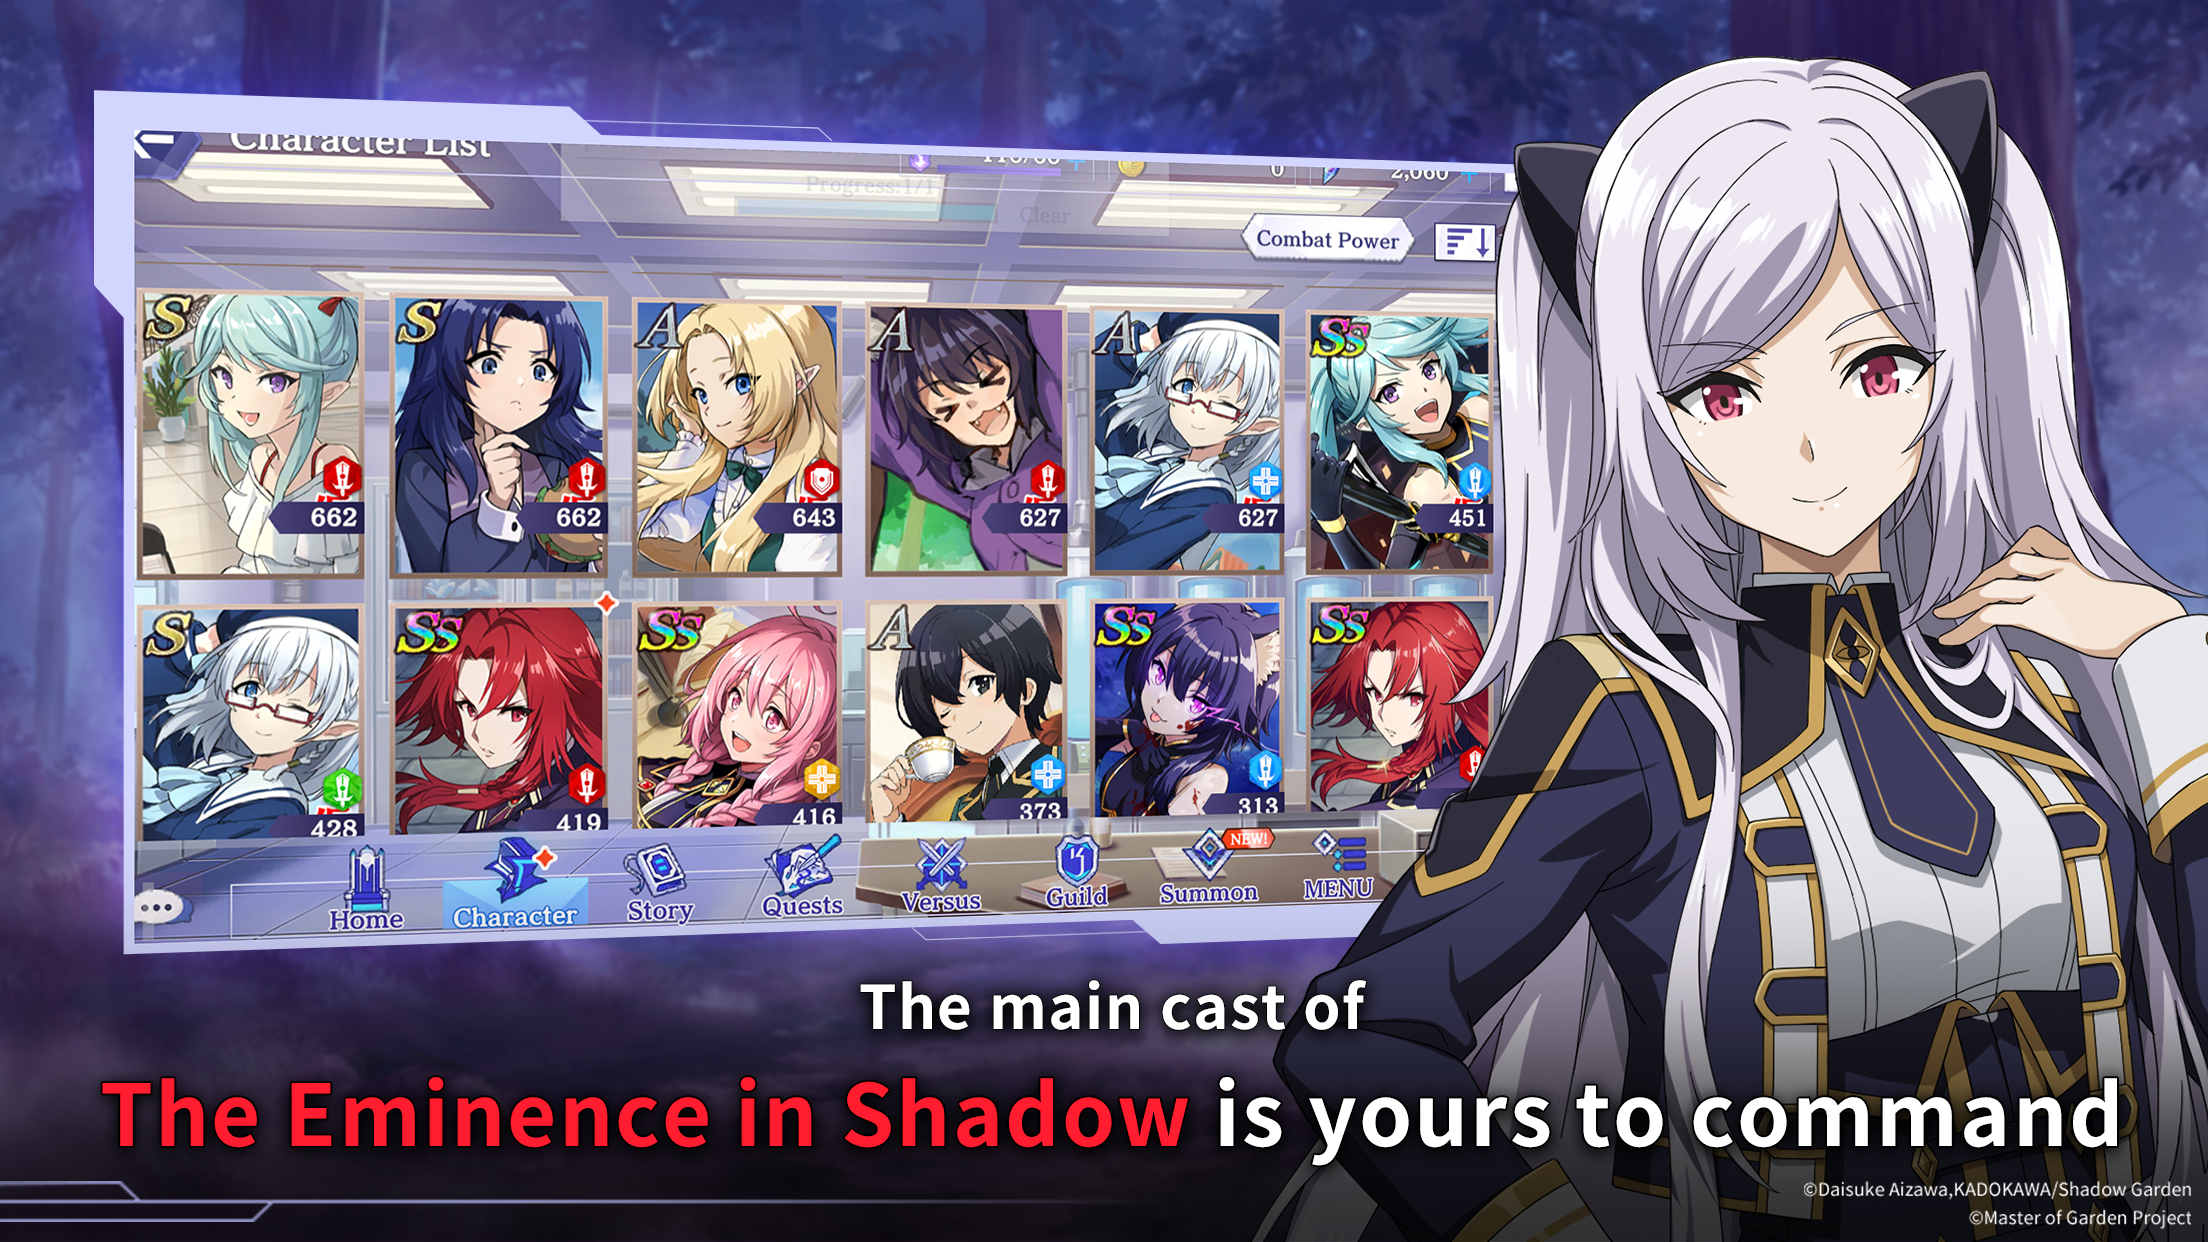 Eminence in Shadow Series Gets iOS, Android, PC Game - News